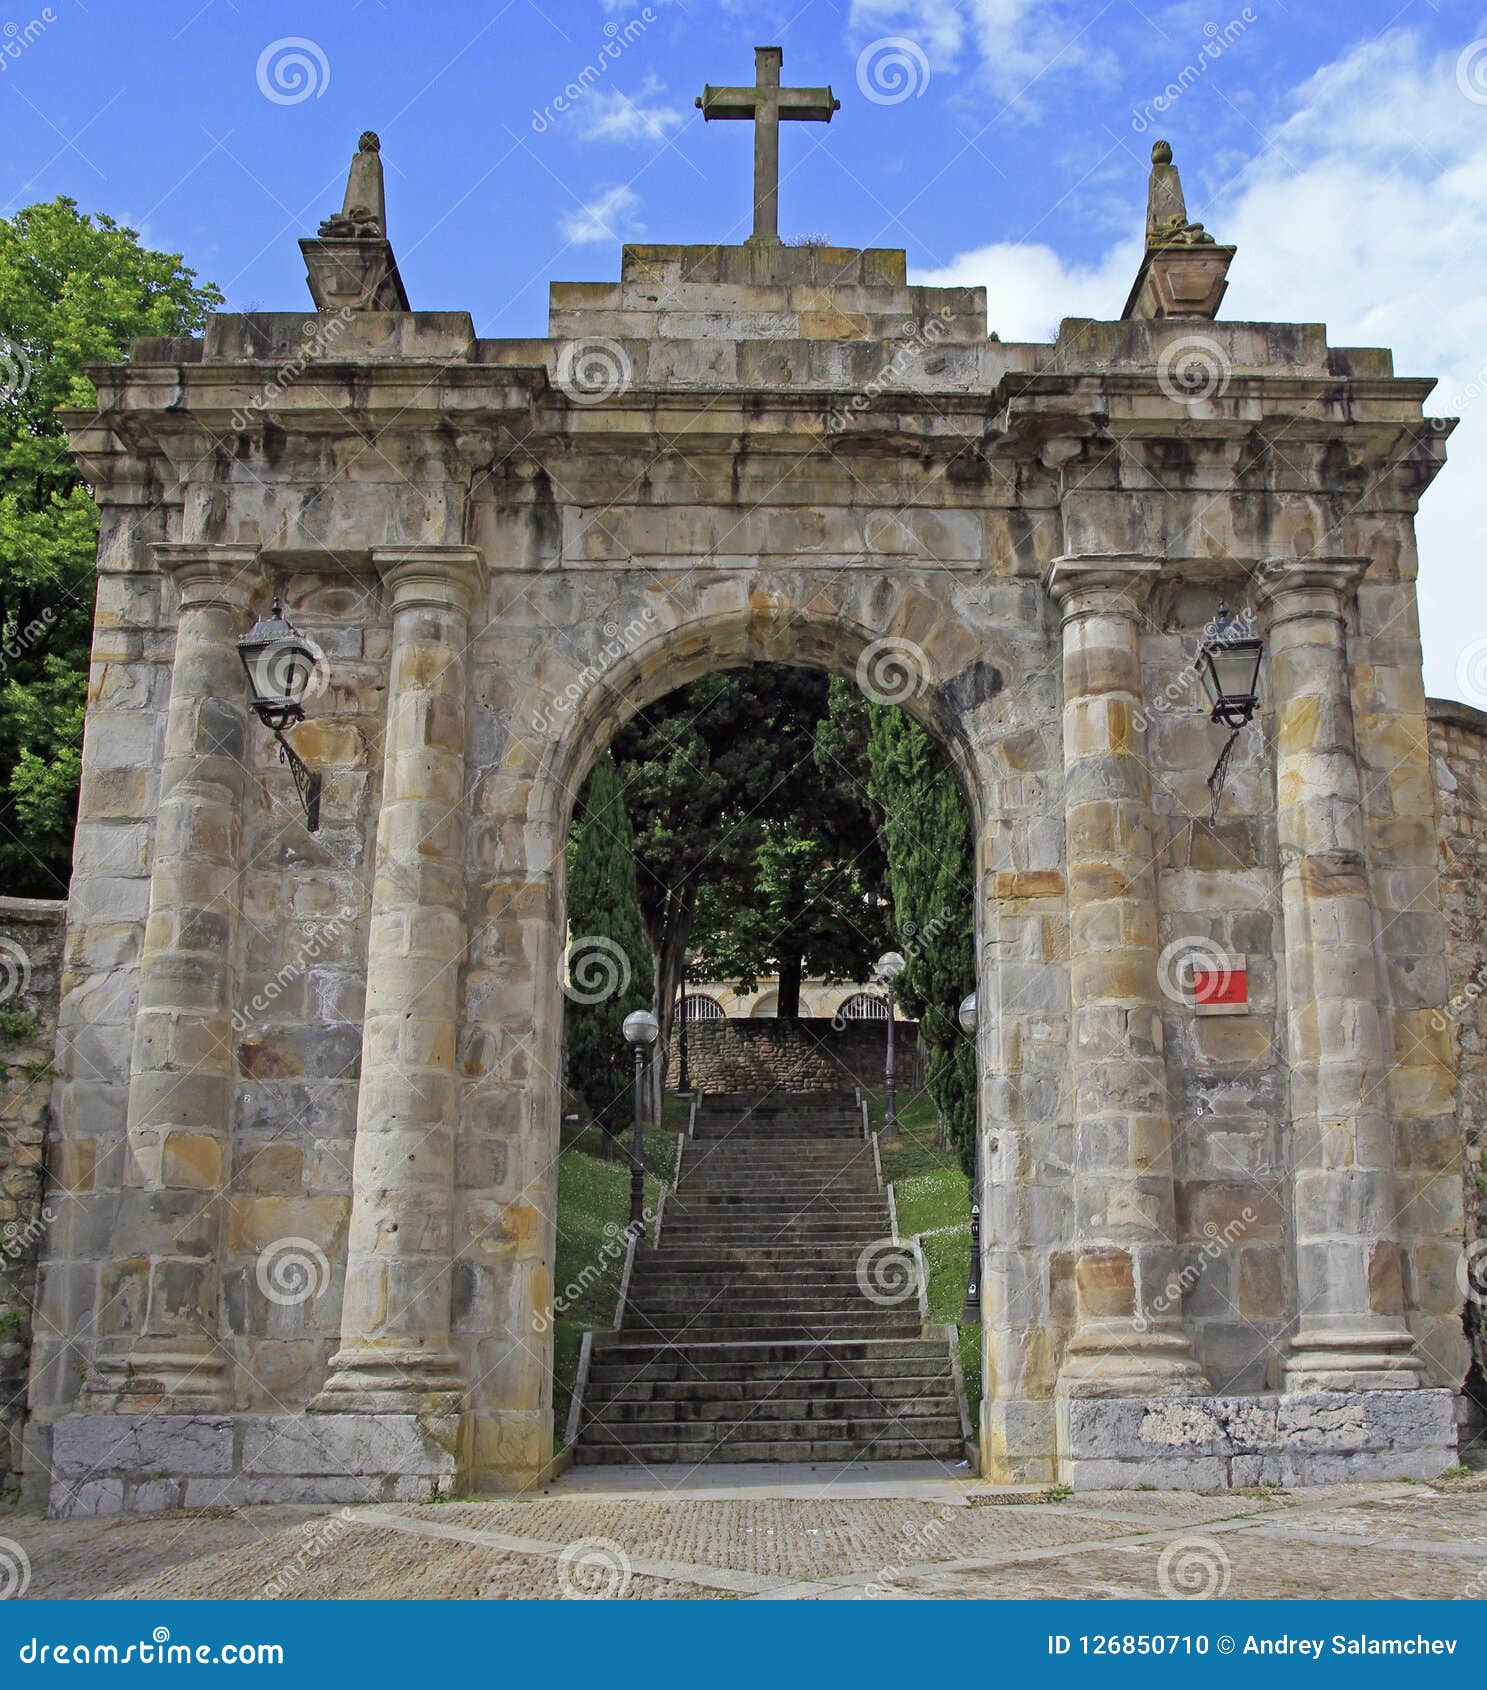 arch of the former cemetery in bilbao